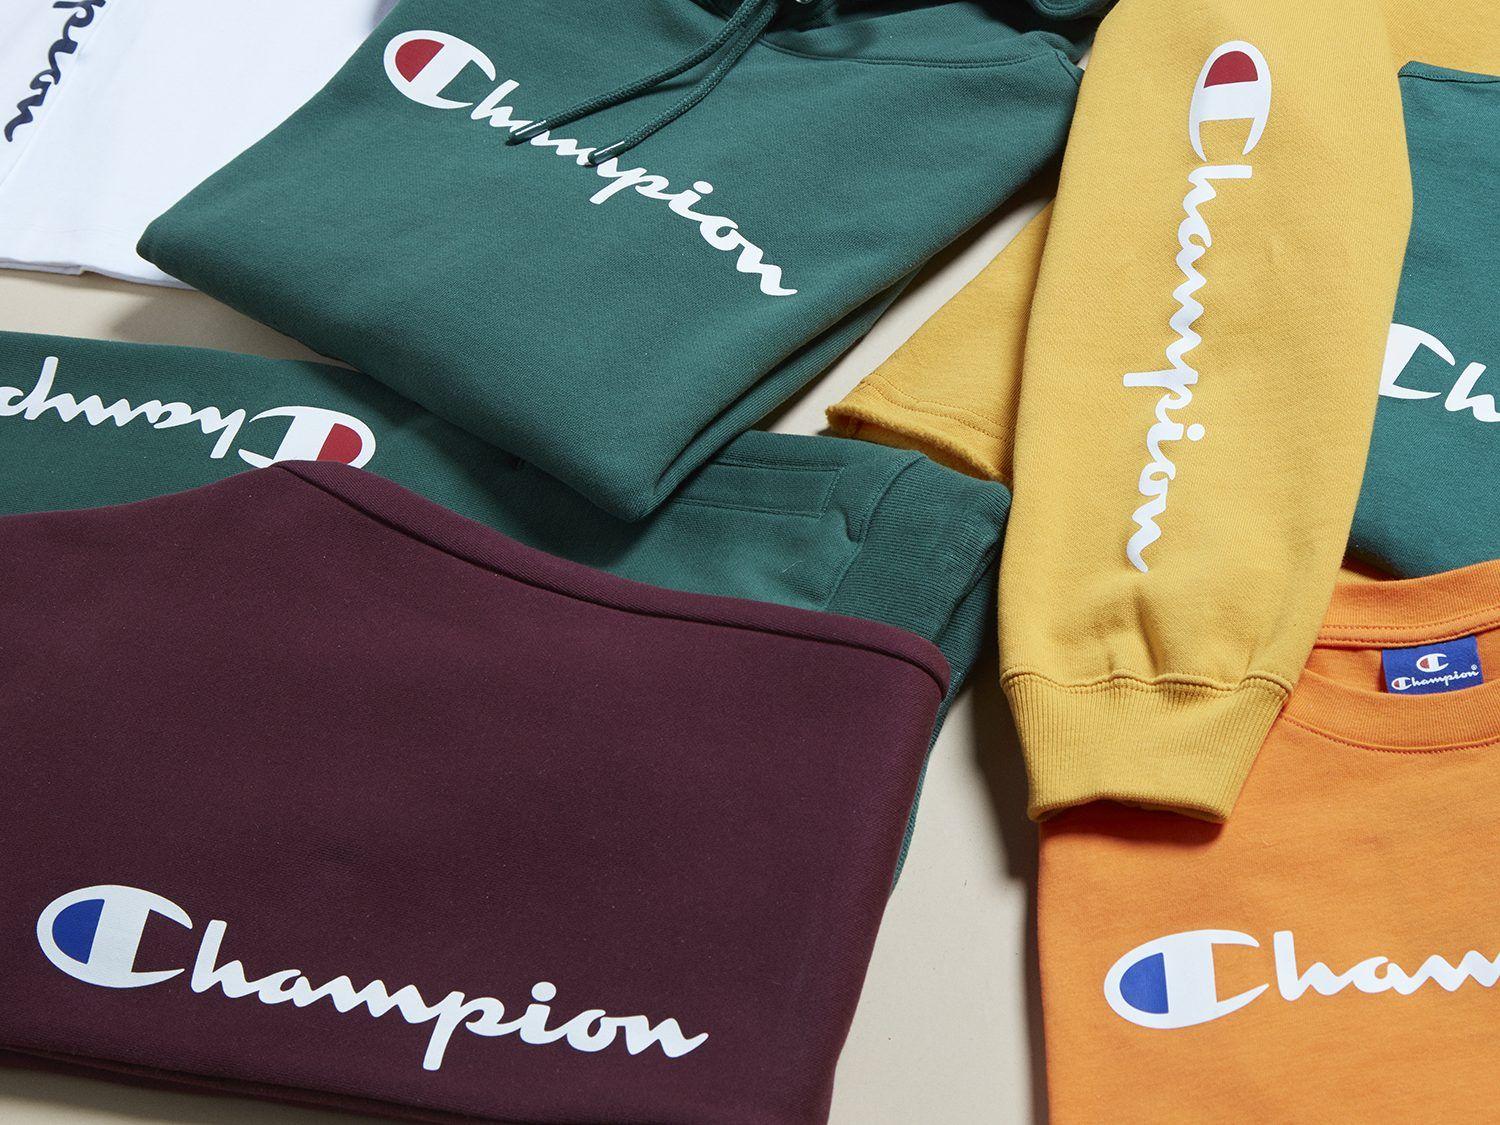 Champion Brand Clothing Logo - Wear Champion and Chill Cause JD Sports Is Bringing the Brand to Town